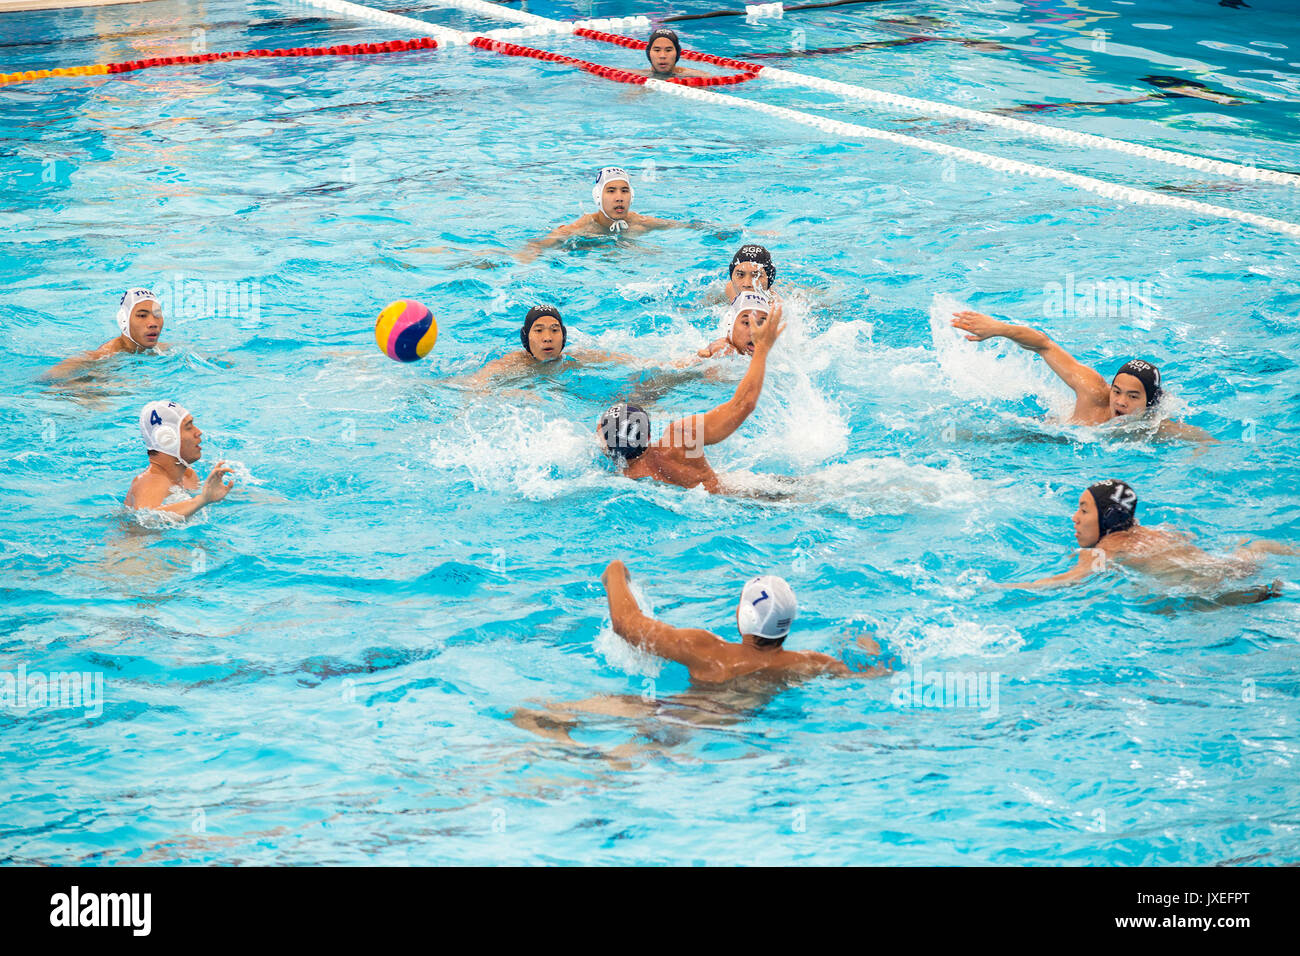 Kuala Lumpur, Malaysia. 16th Aug, 2017.  Yip Yang (number 11) of Singapore, attacks against Thailand in the men's water polo round robin match during the South East Asian Games in Kuala Lumpur. Singapore won 13-2 in their first match of the competition. Singapore dominates the competition, having won all 26 editions since the beginning of the South East Asian Peninsular Games in 1965. Credit: SOPA Images Limited/Alamy Live News Stock Photo